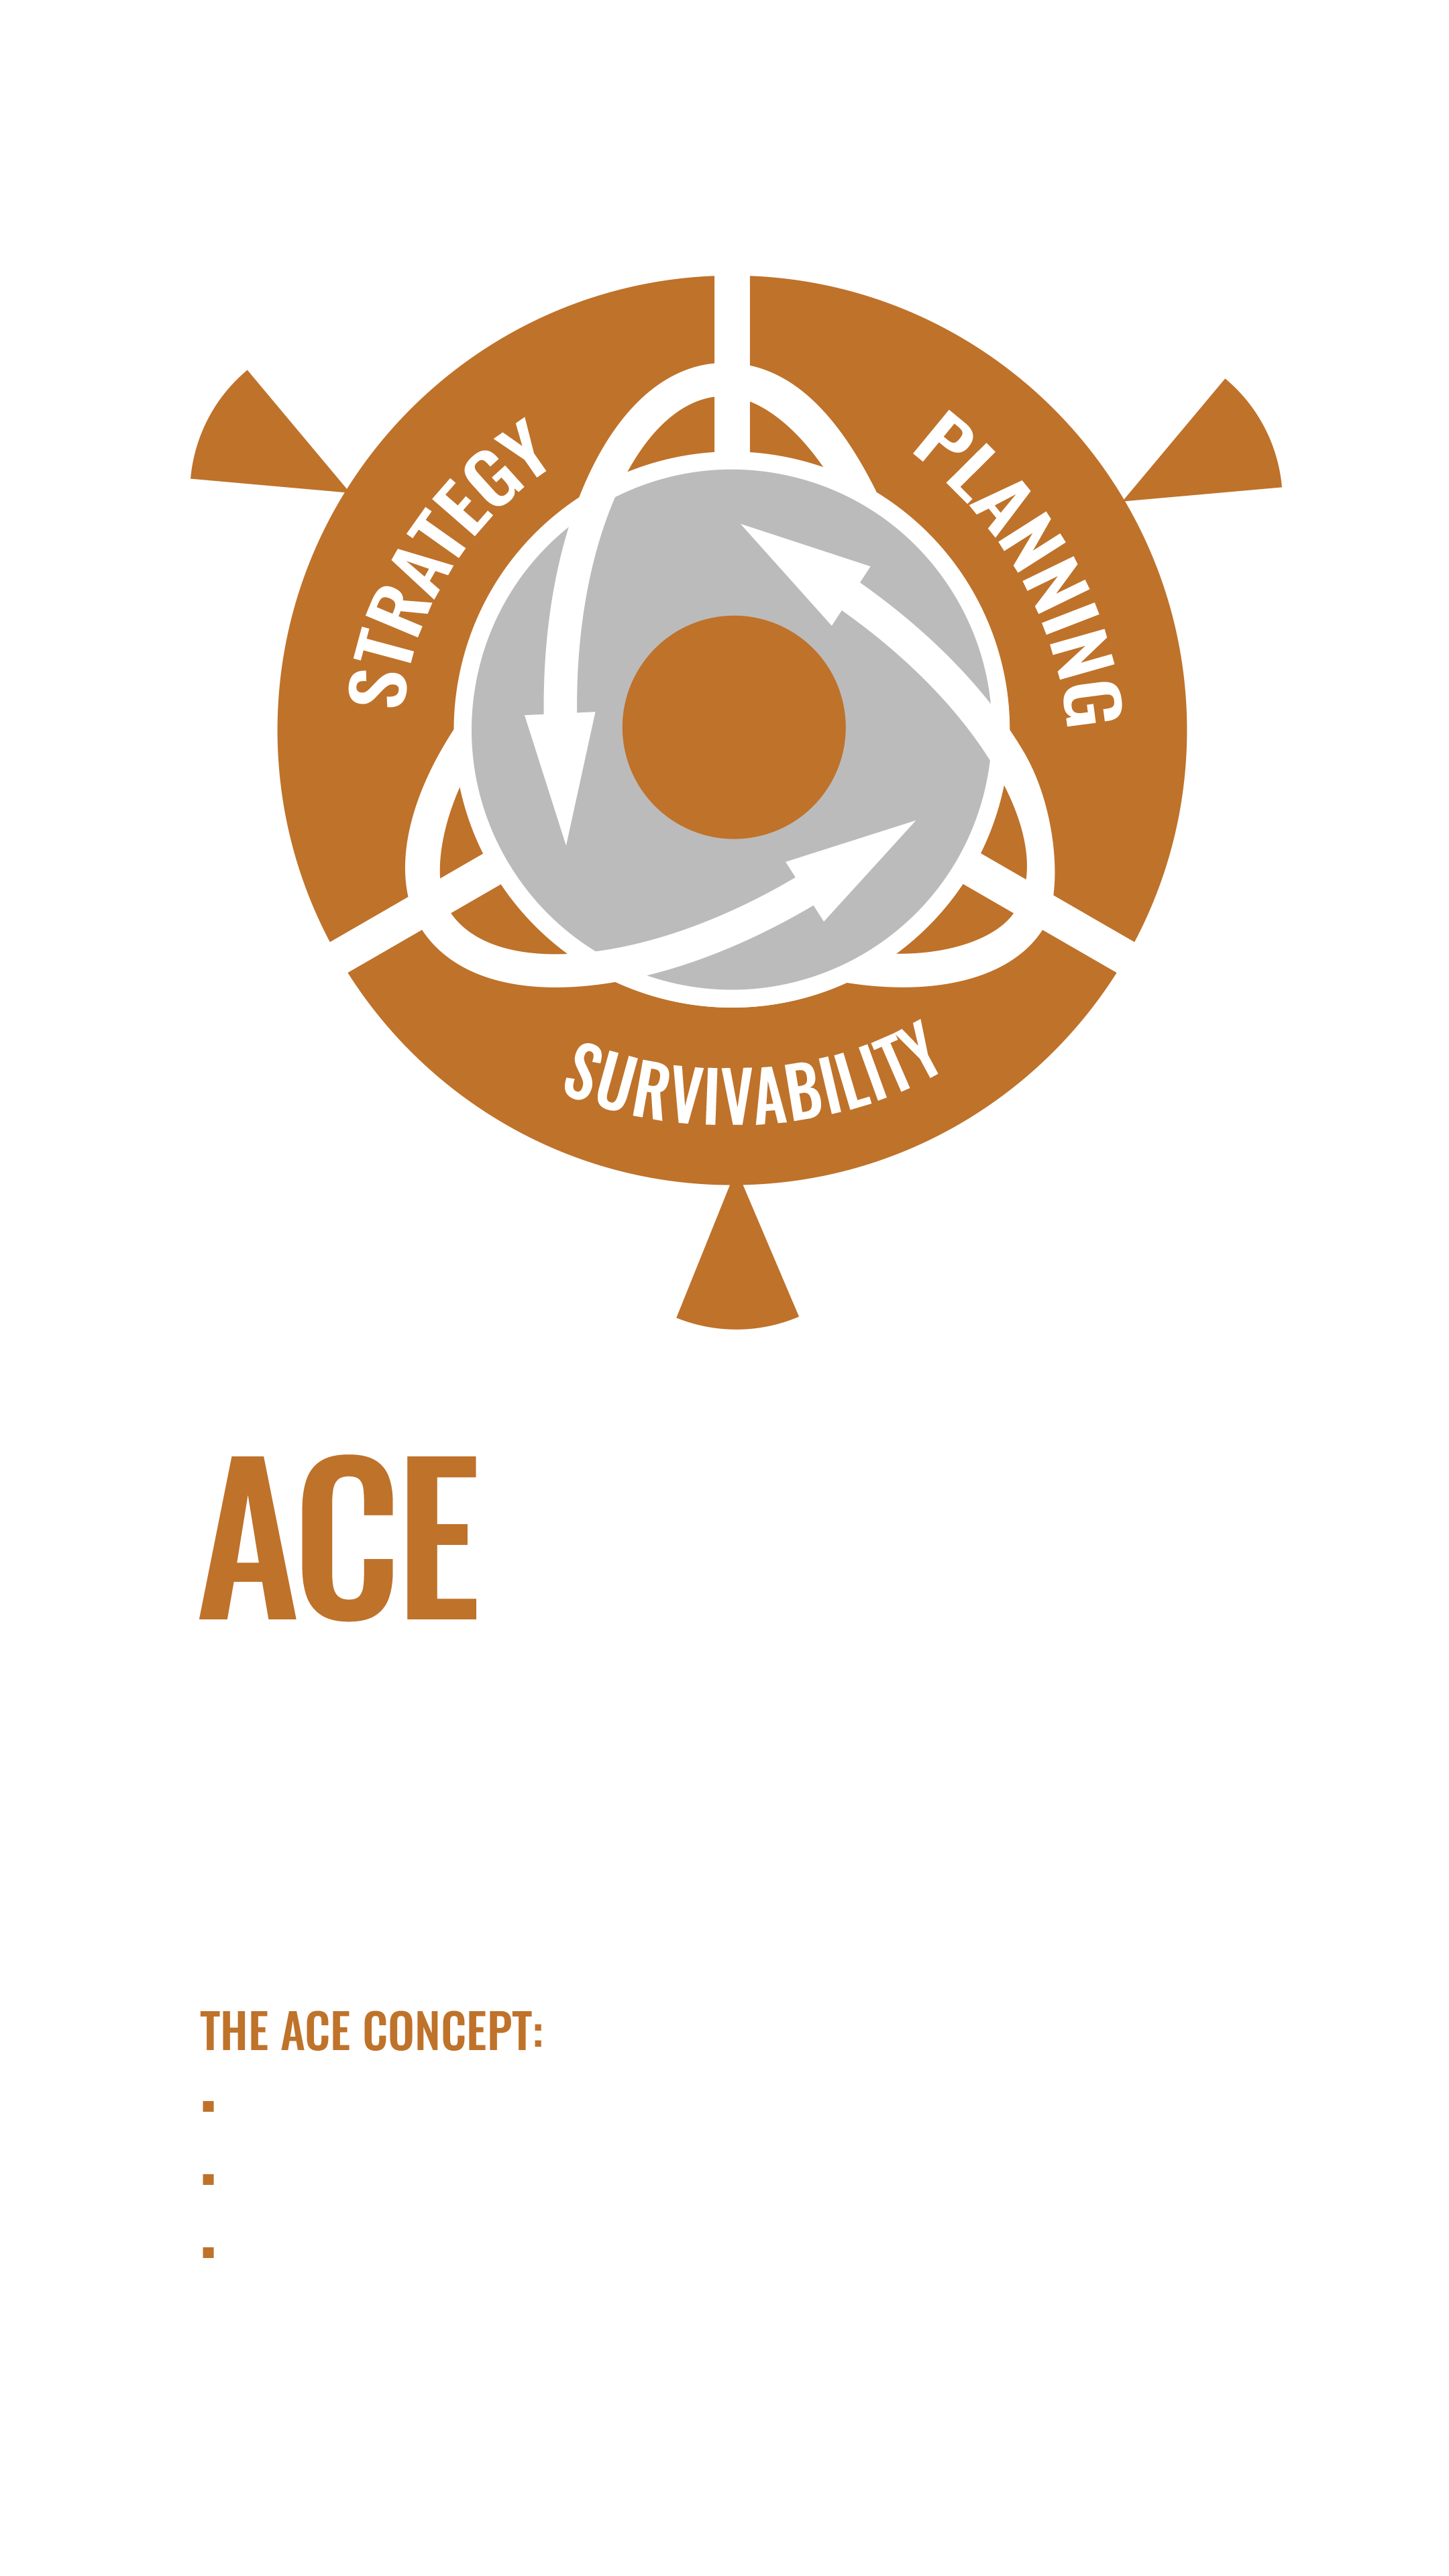 Drivers For Change: Agile Combat Employment